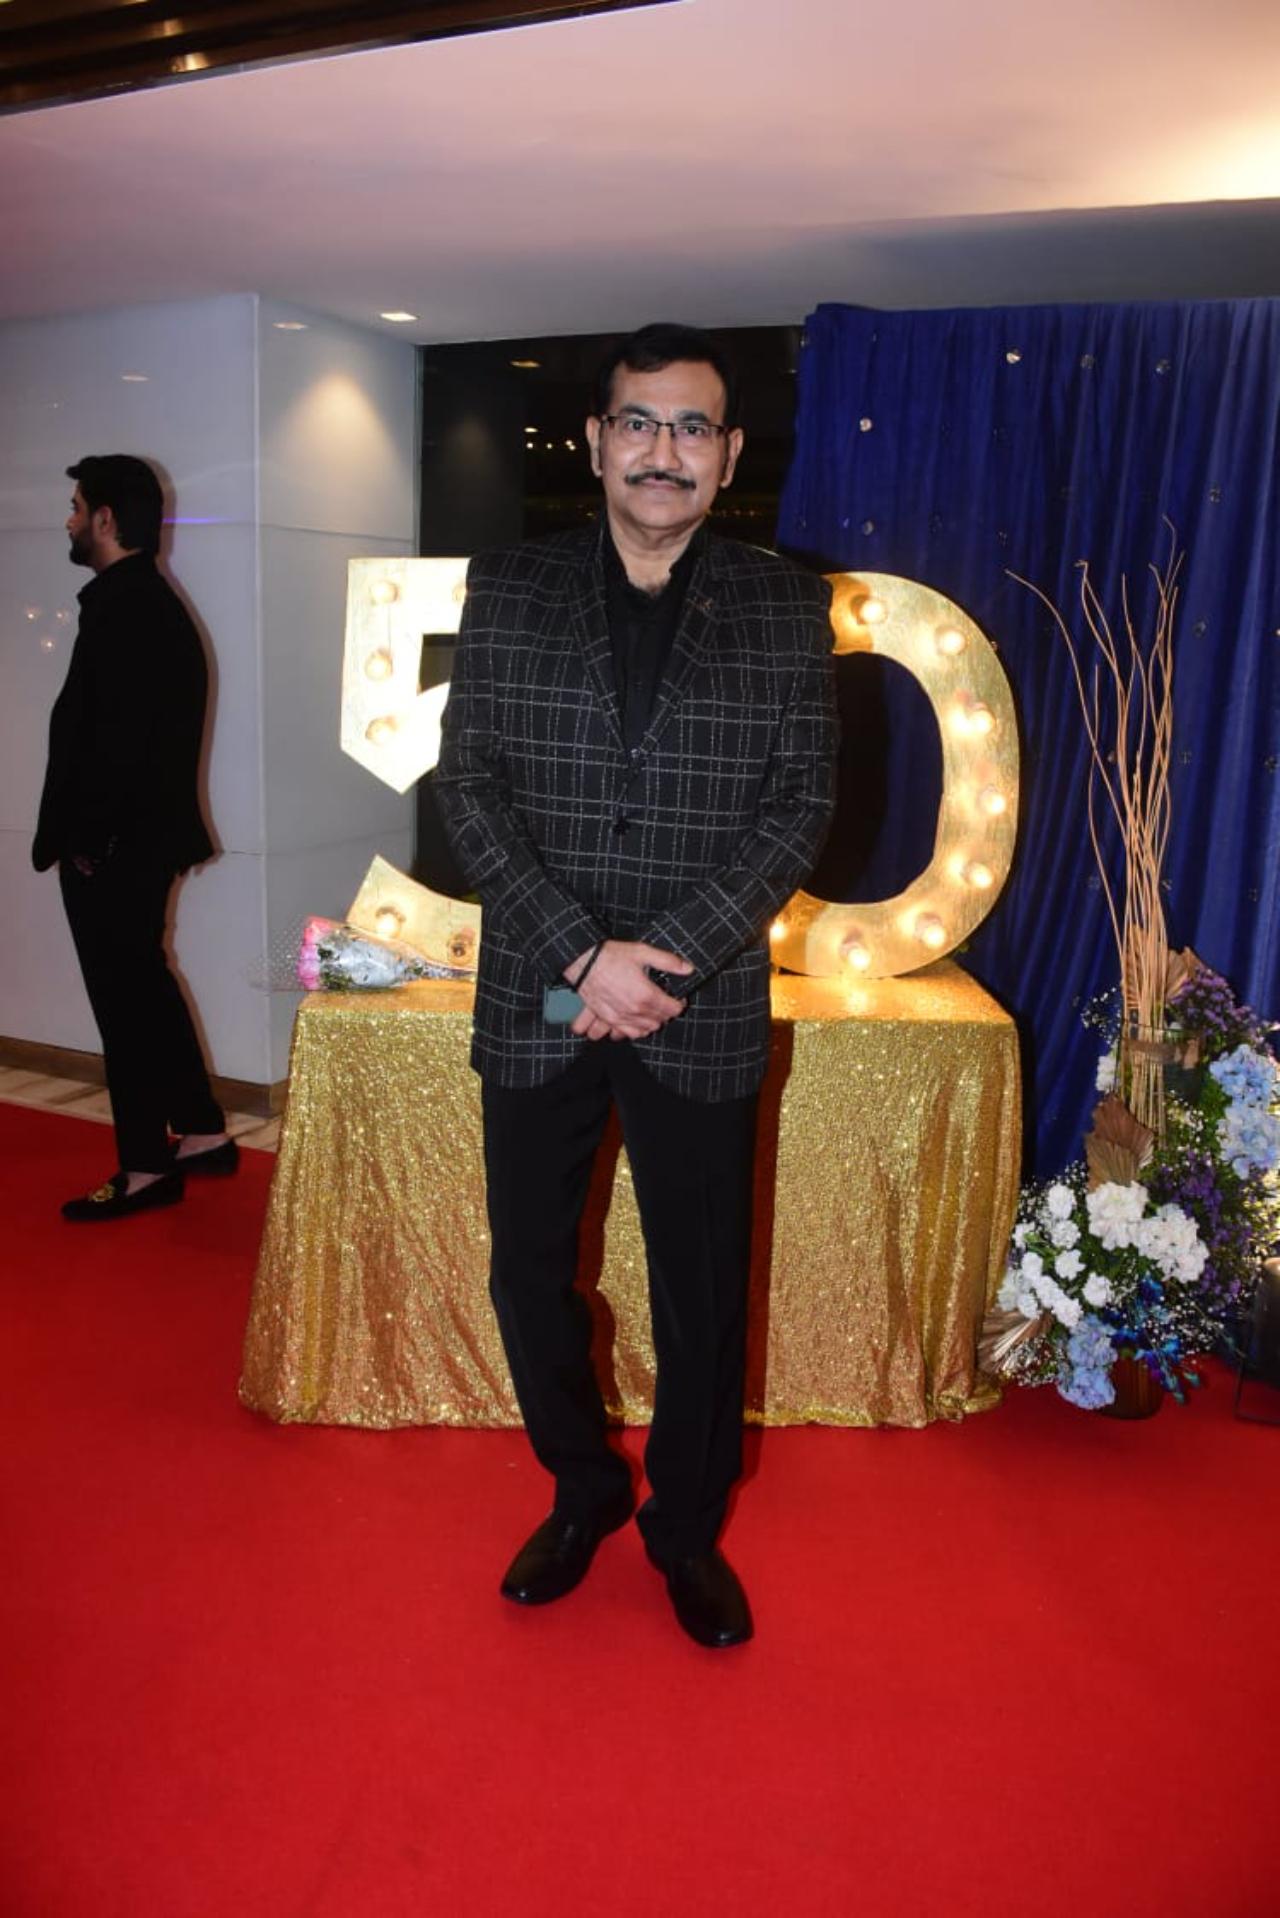 Playback singer Sudhesh Bhosle, who has sung songs like 'I Love You Bol Daal' along with Sonu Nigam also attended his birthday bash